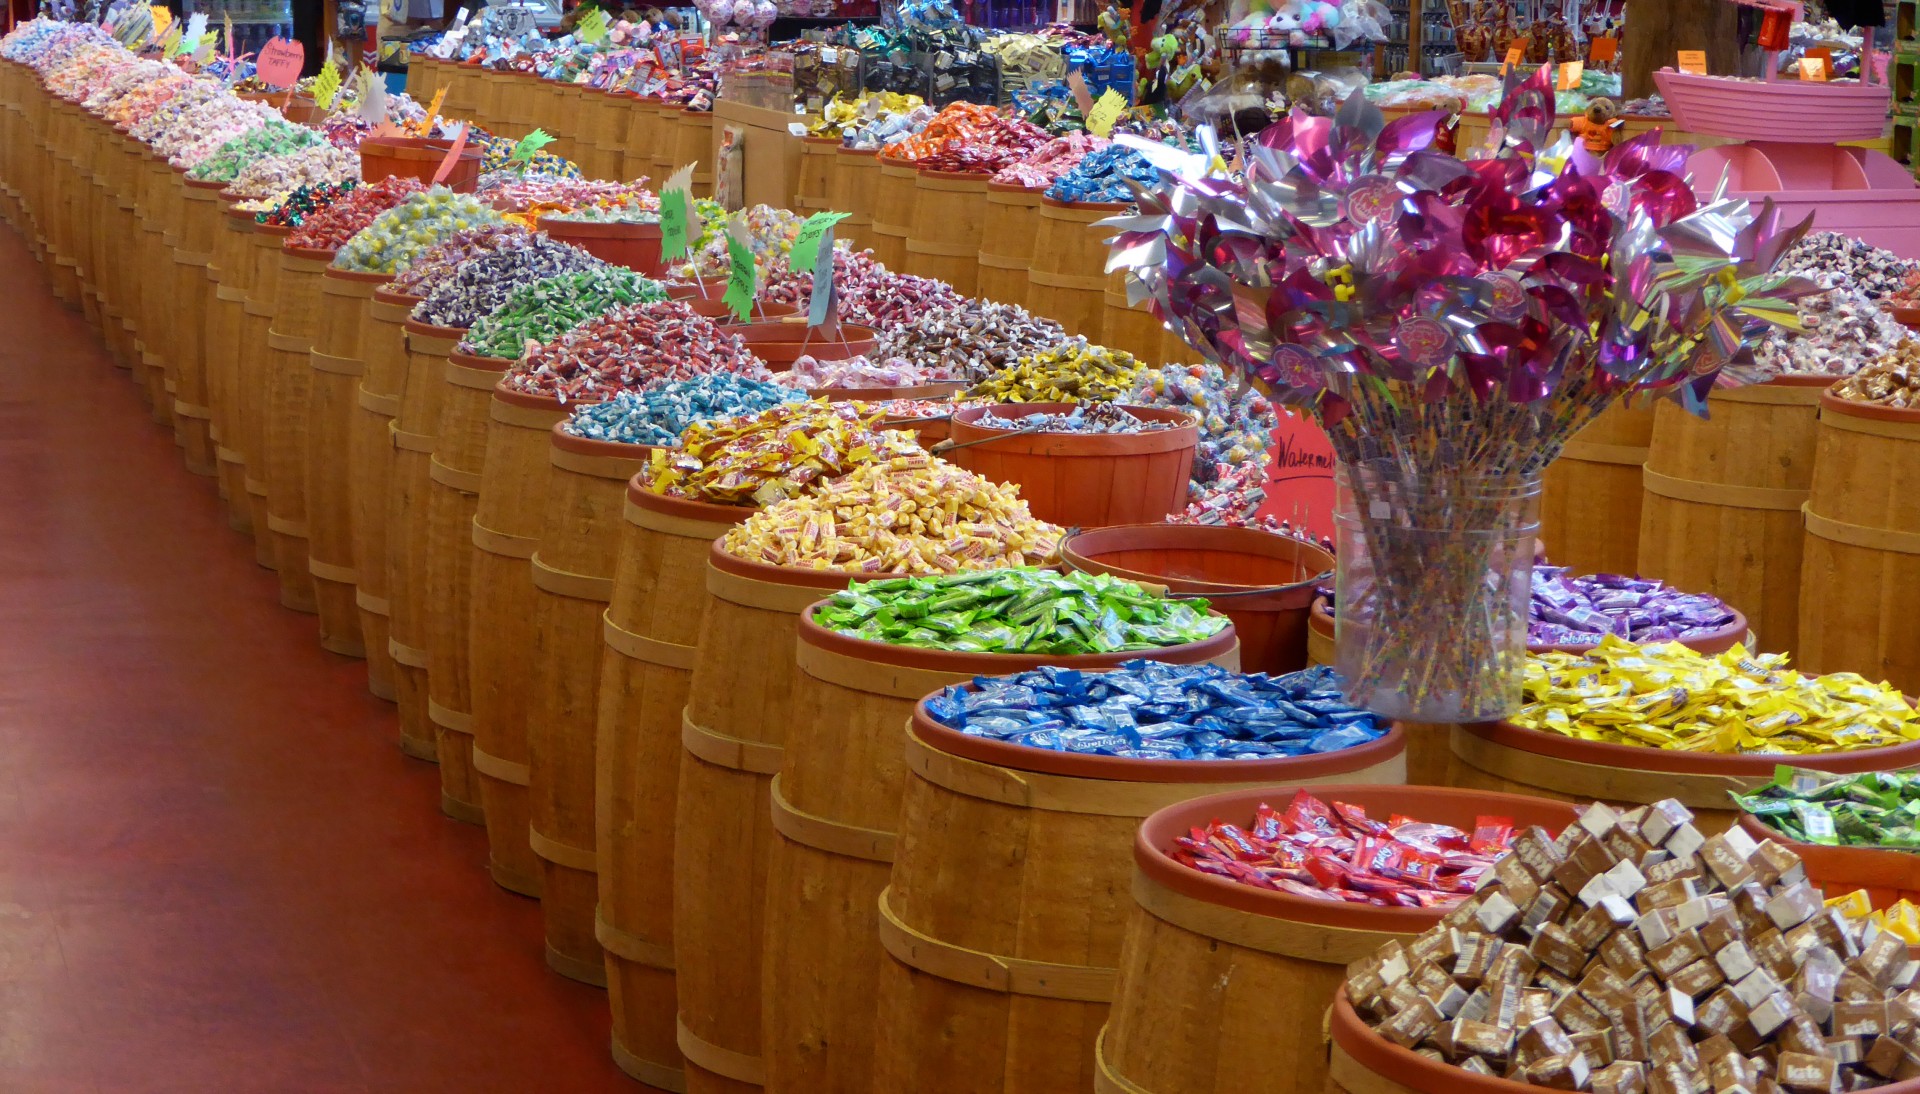 3 Candy Transportation Habits You May Need to Break